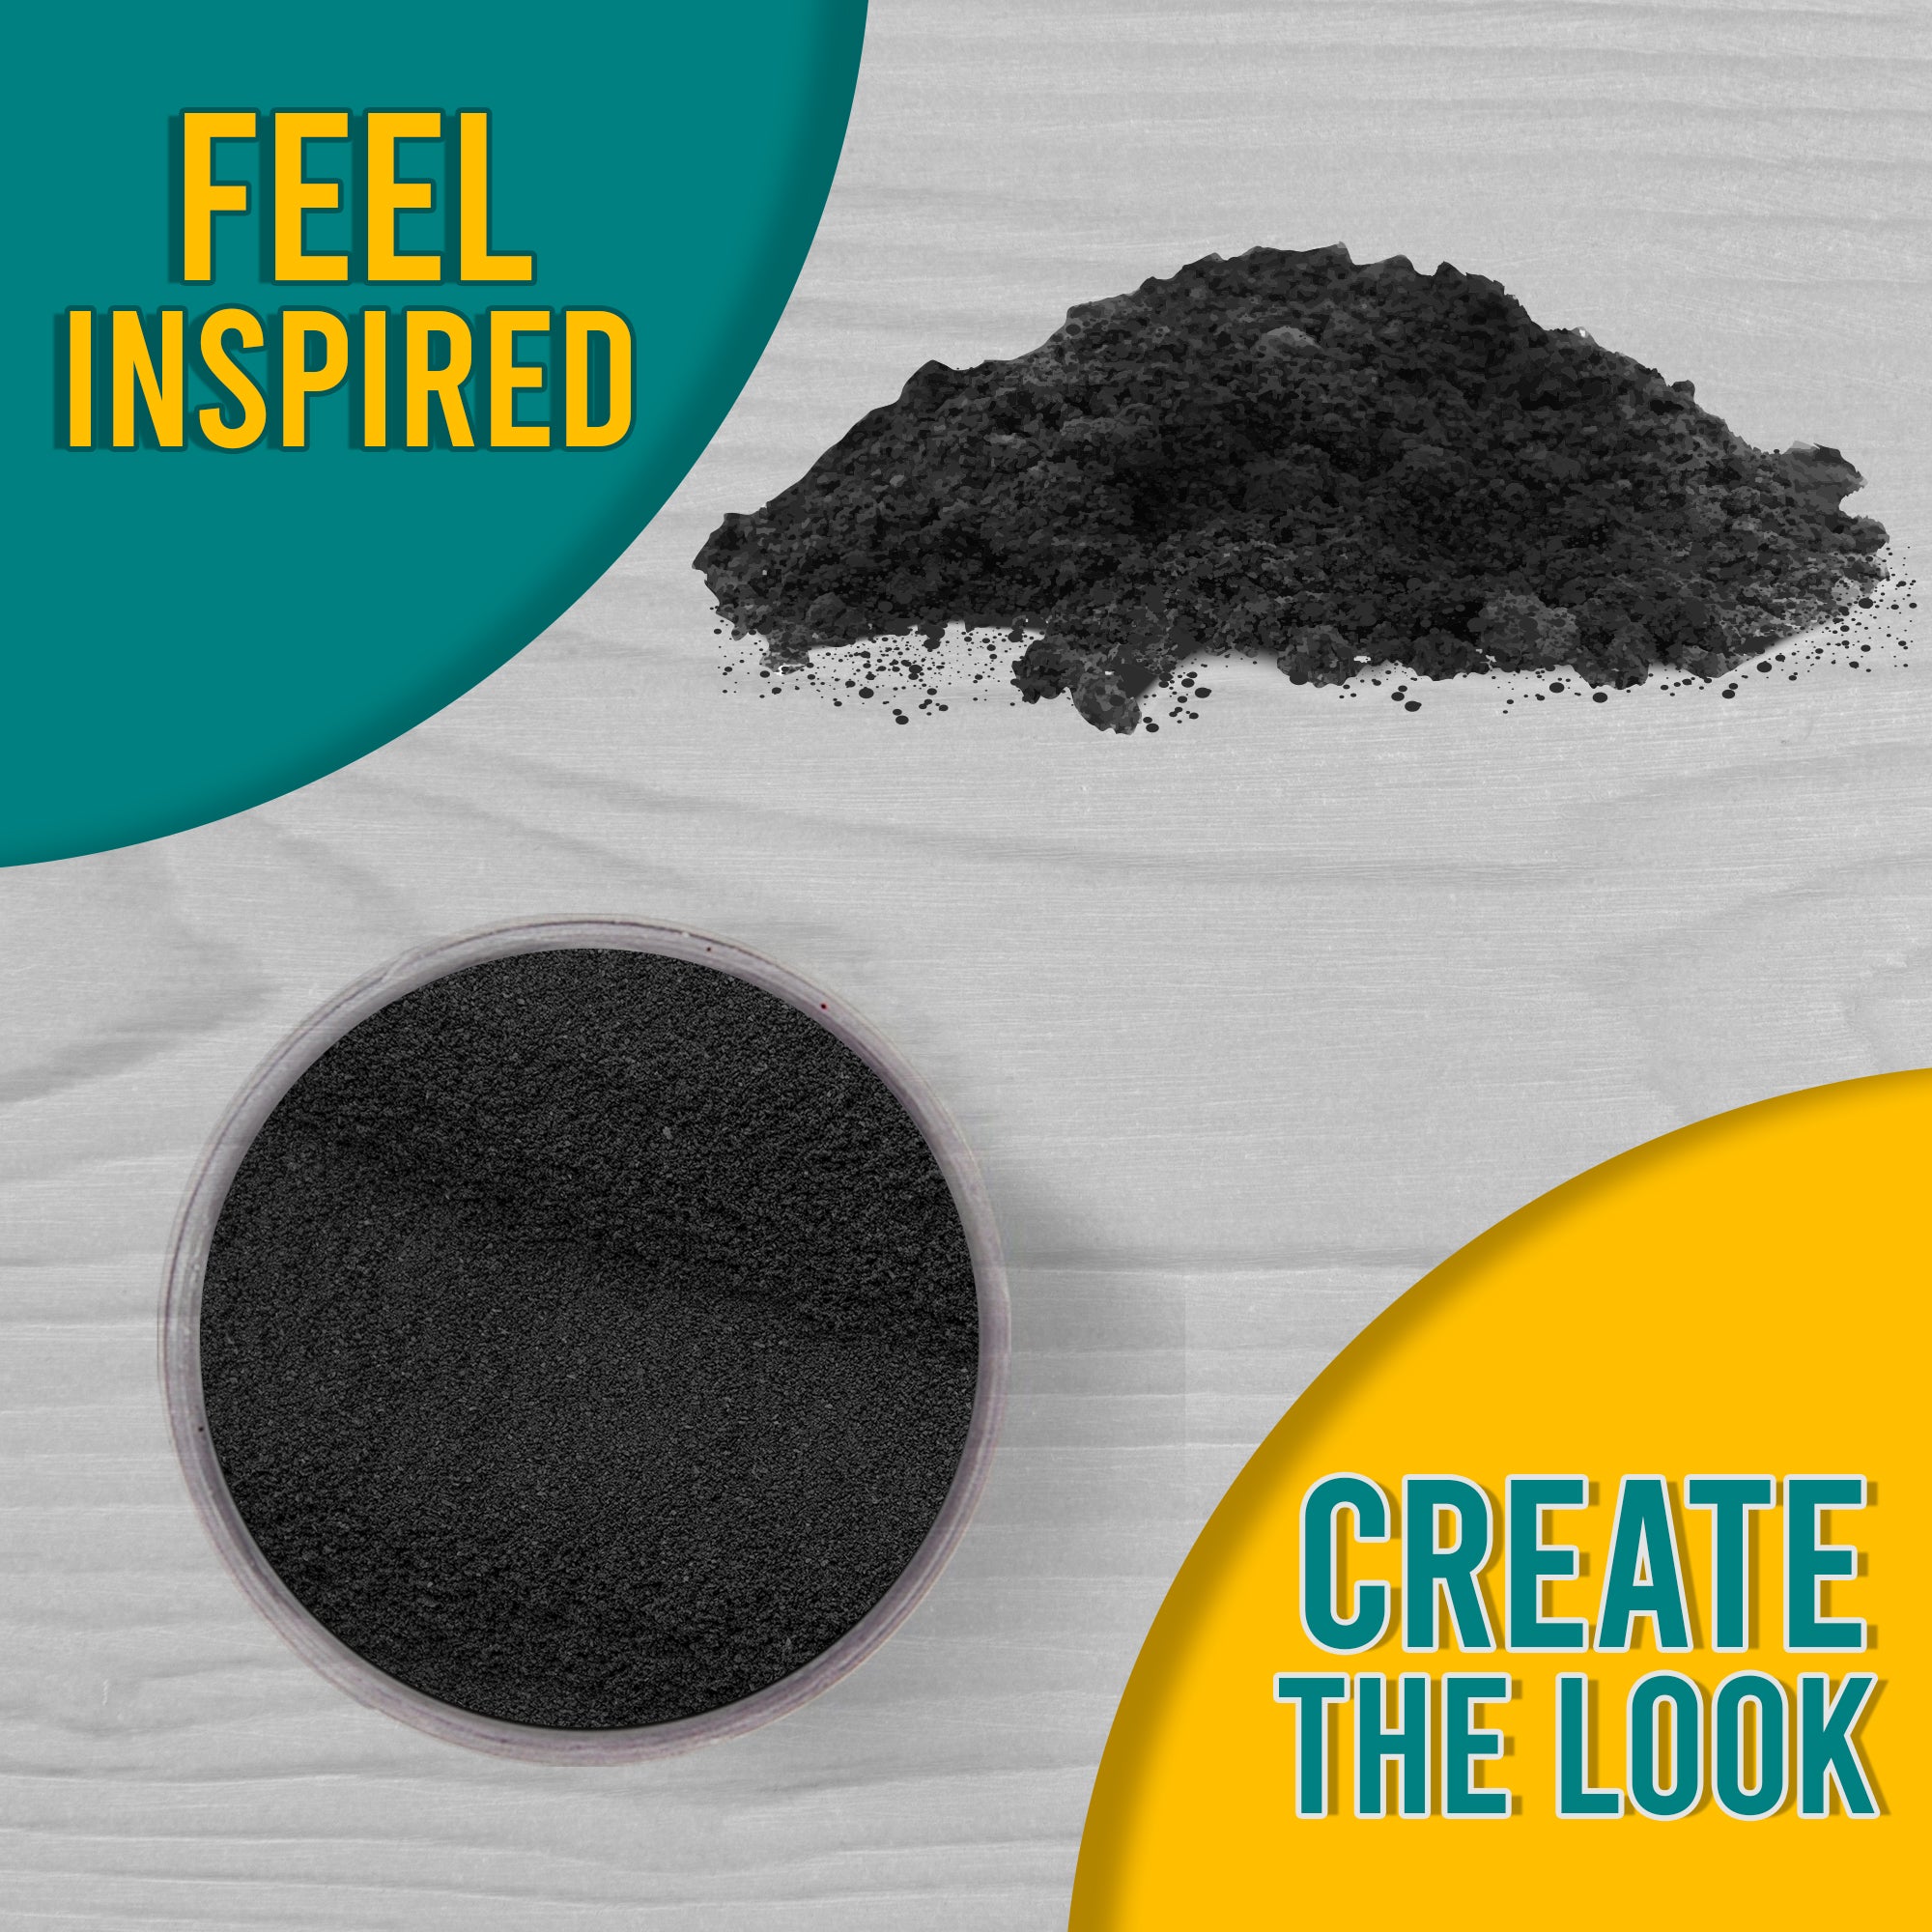 A 'Feel Inspired, Create the Look' graphic displaying Black embossing powder from a top view, both in its jar and sprinkled on a surface.